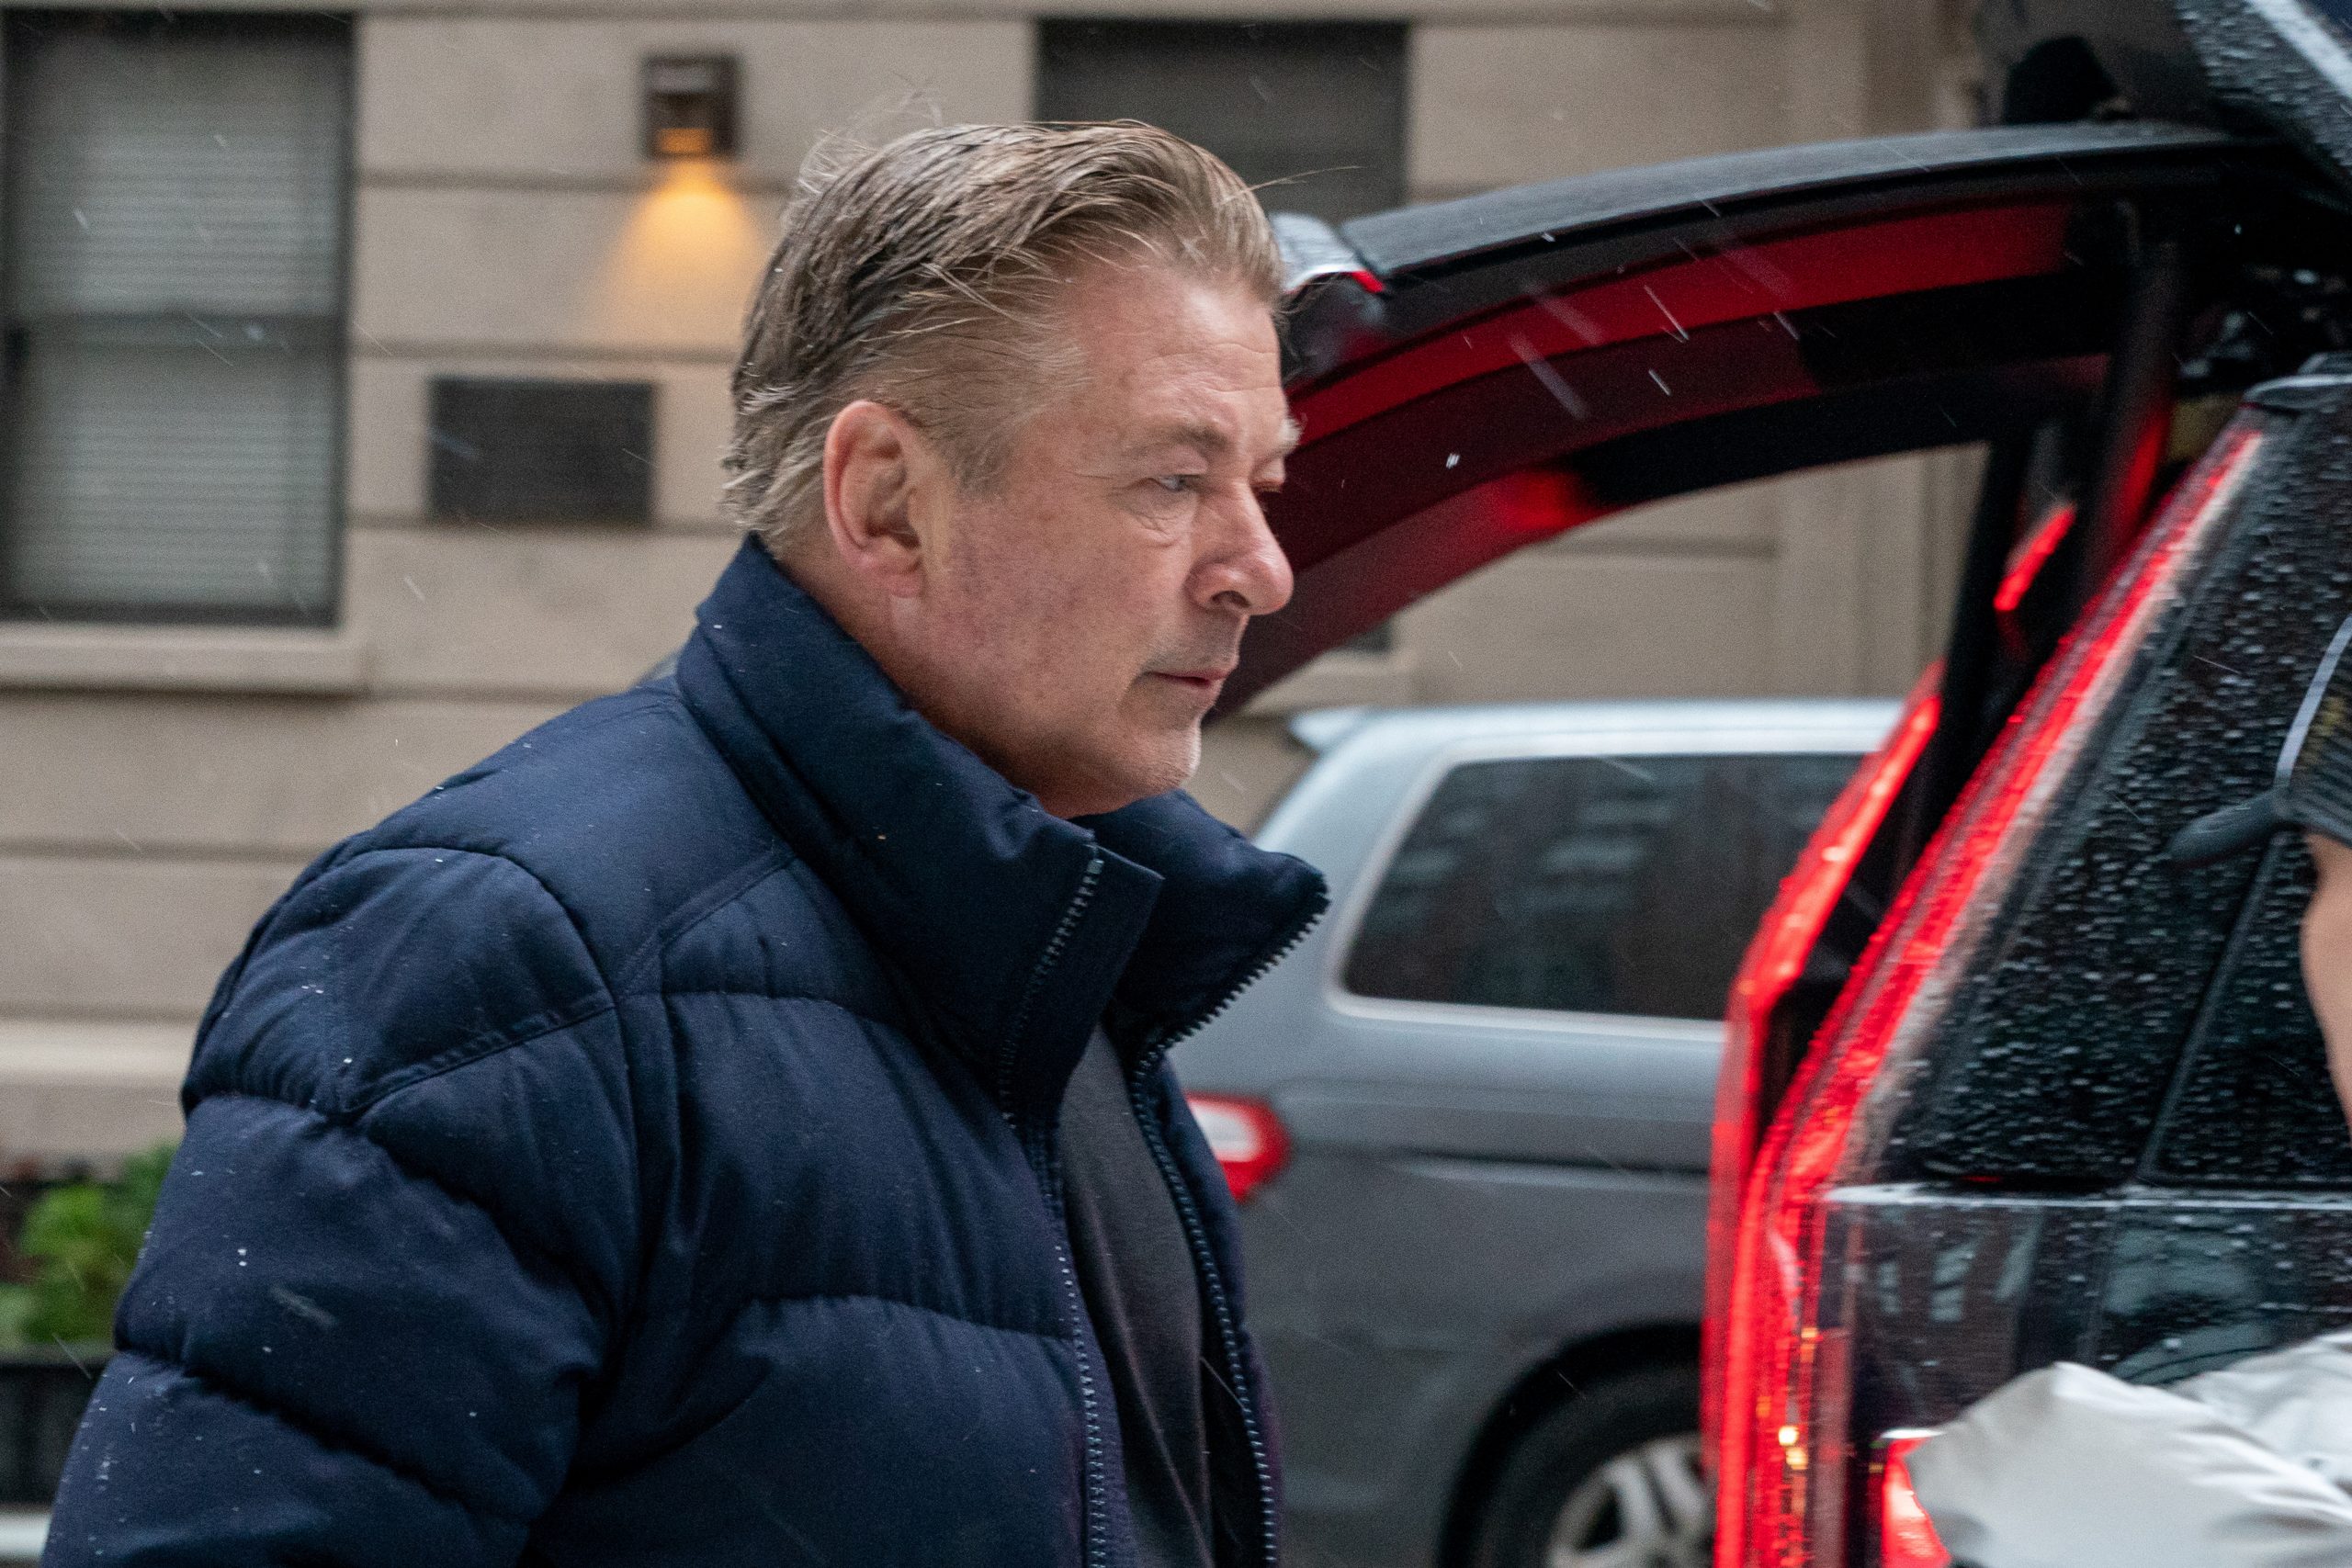 Criminal Charges Against Alec Baldwin Dropped in Fatal Shooting